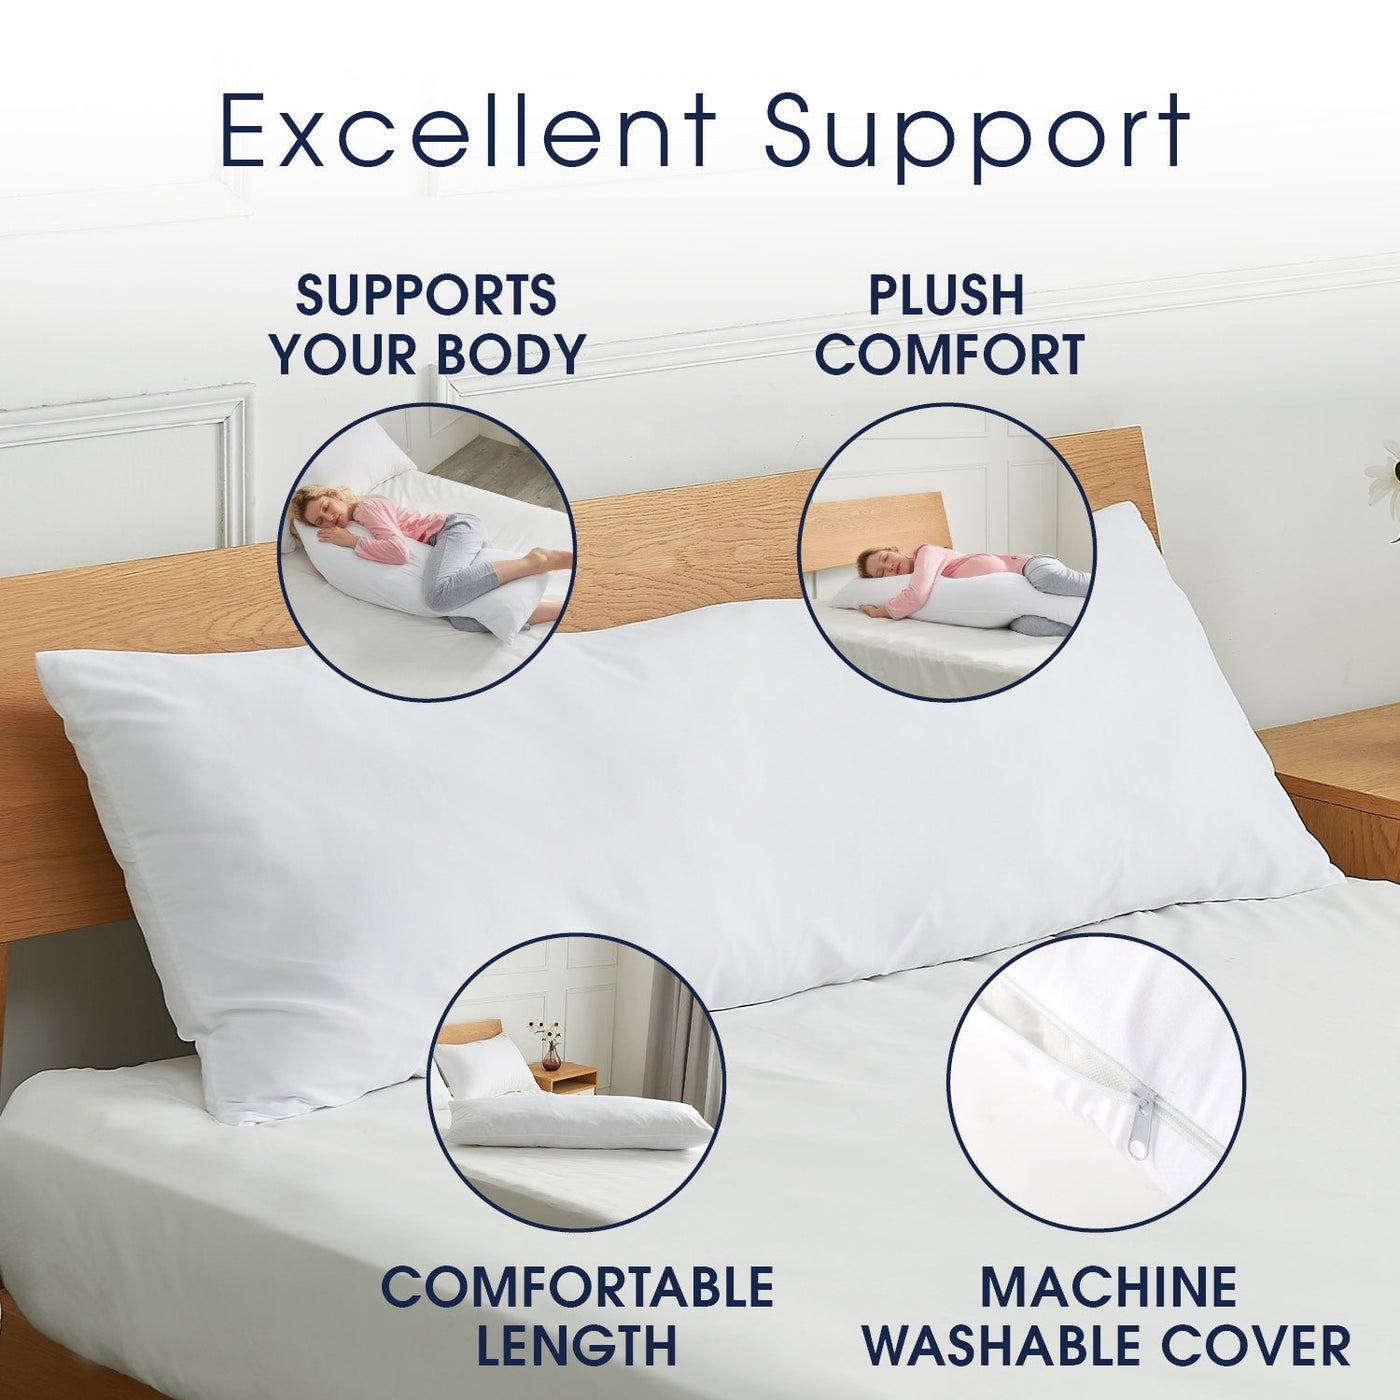 Cheer Collection Set of 4 Standard Size Down Alternative Pillows (20 x 28)